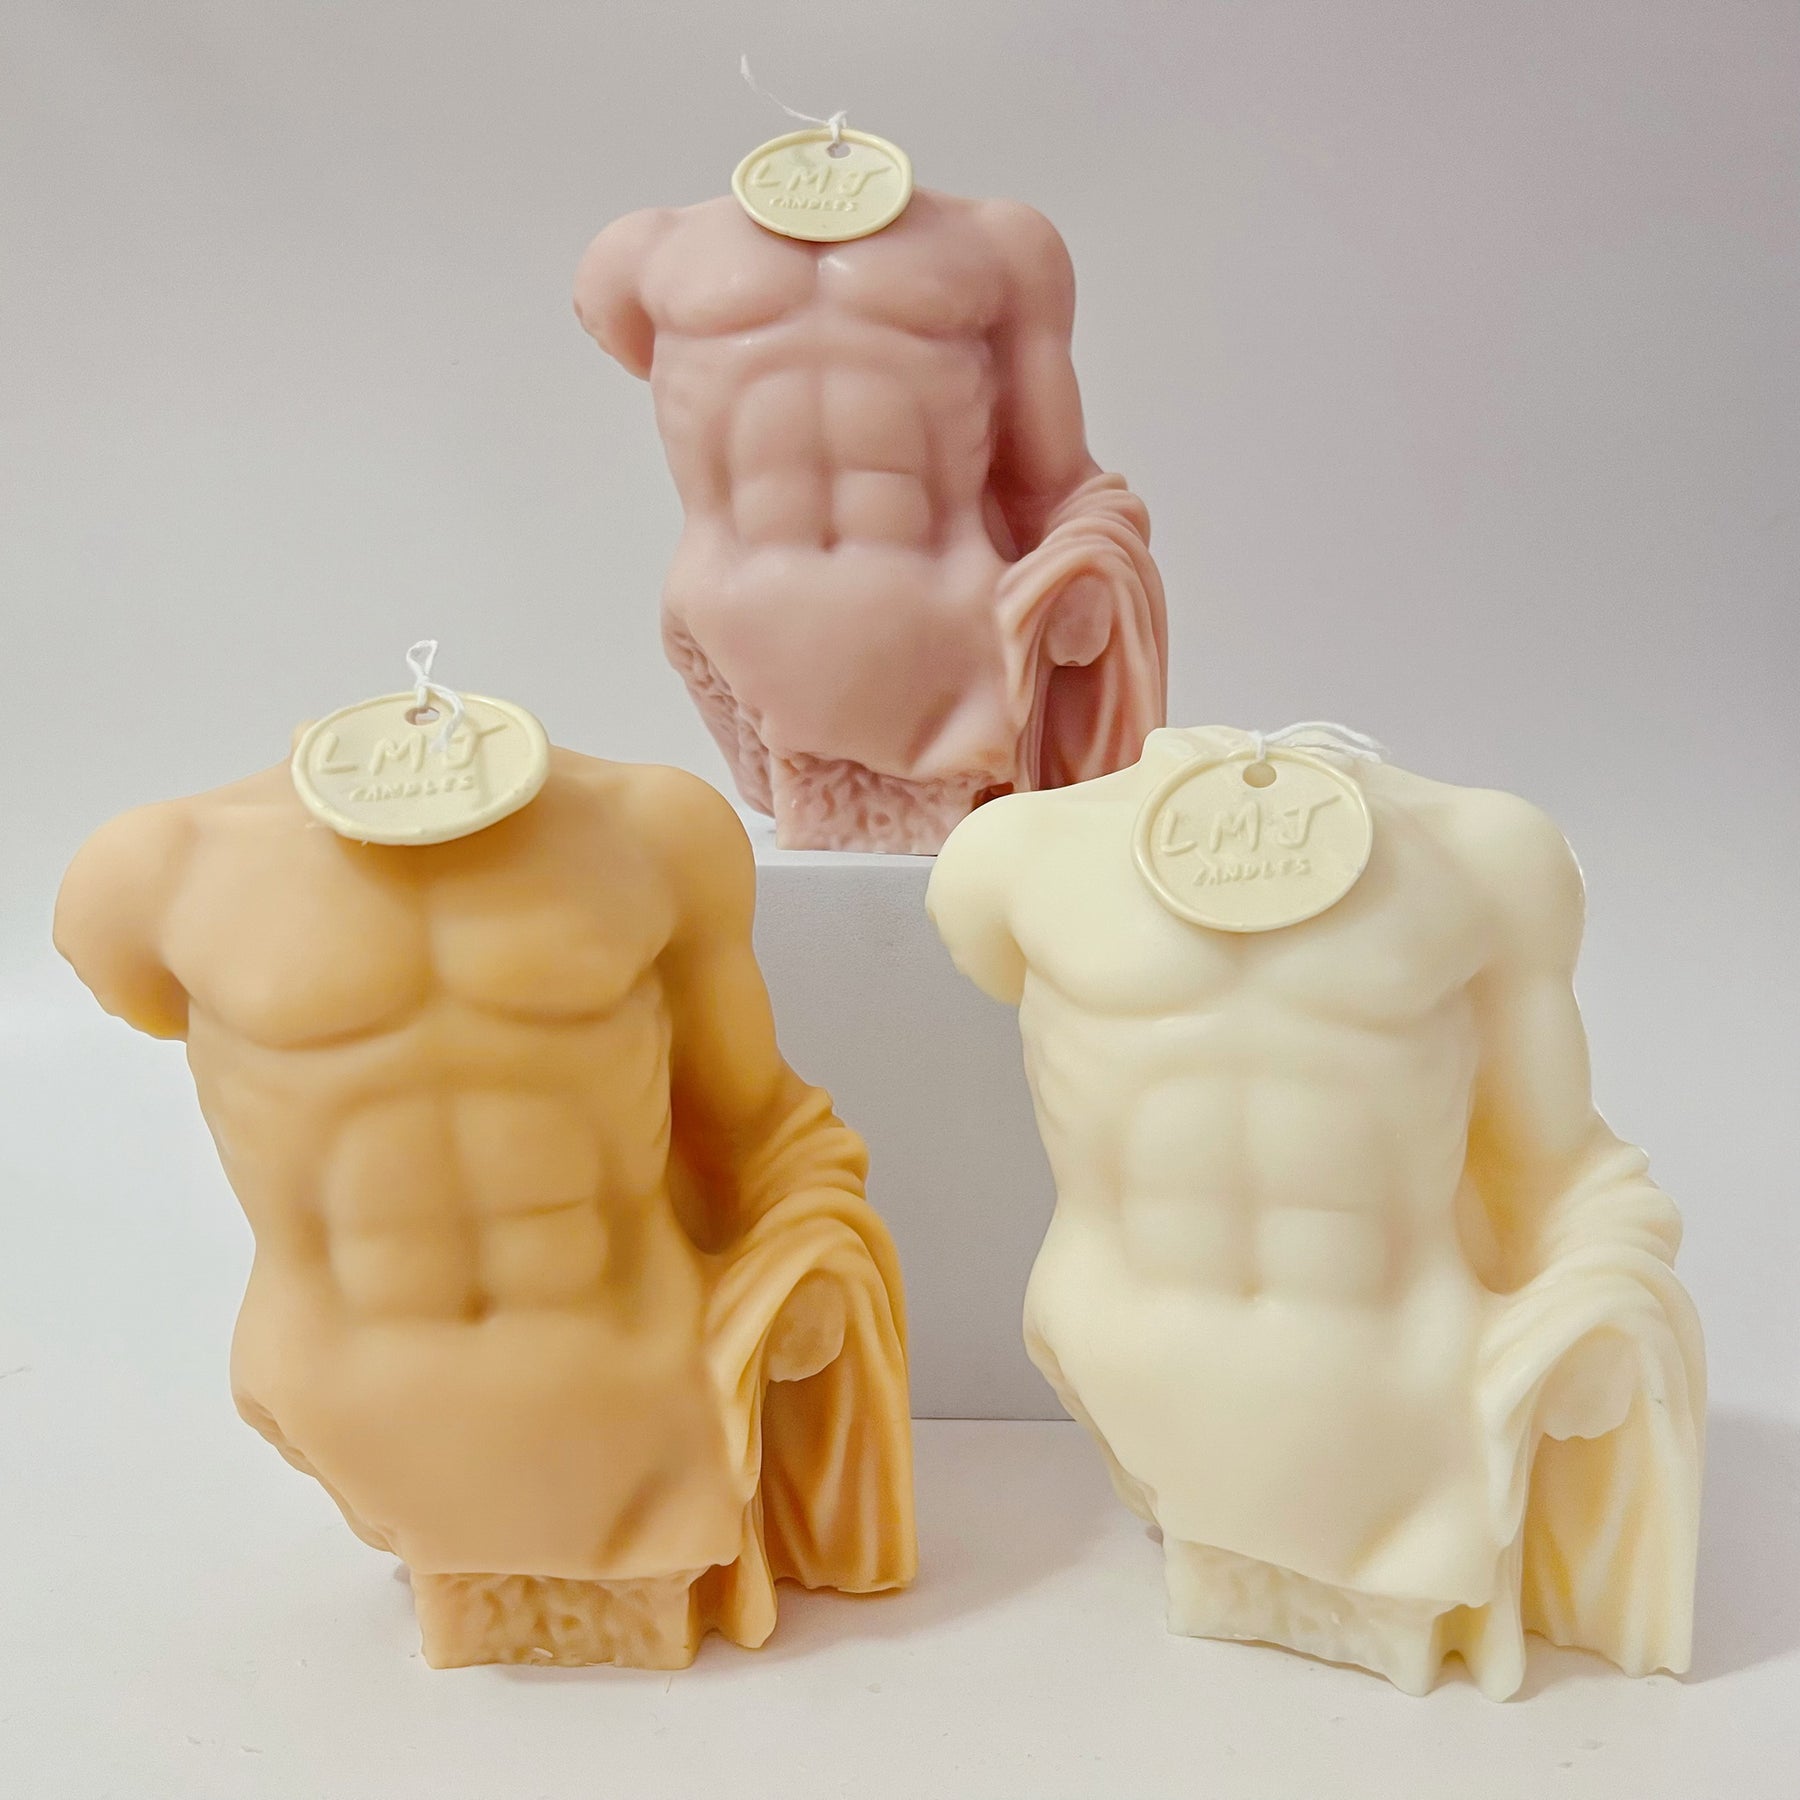 Greek Body Statue Candle - Male Torso Scented Soy Candle LMJ Candles